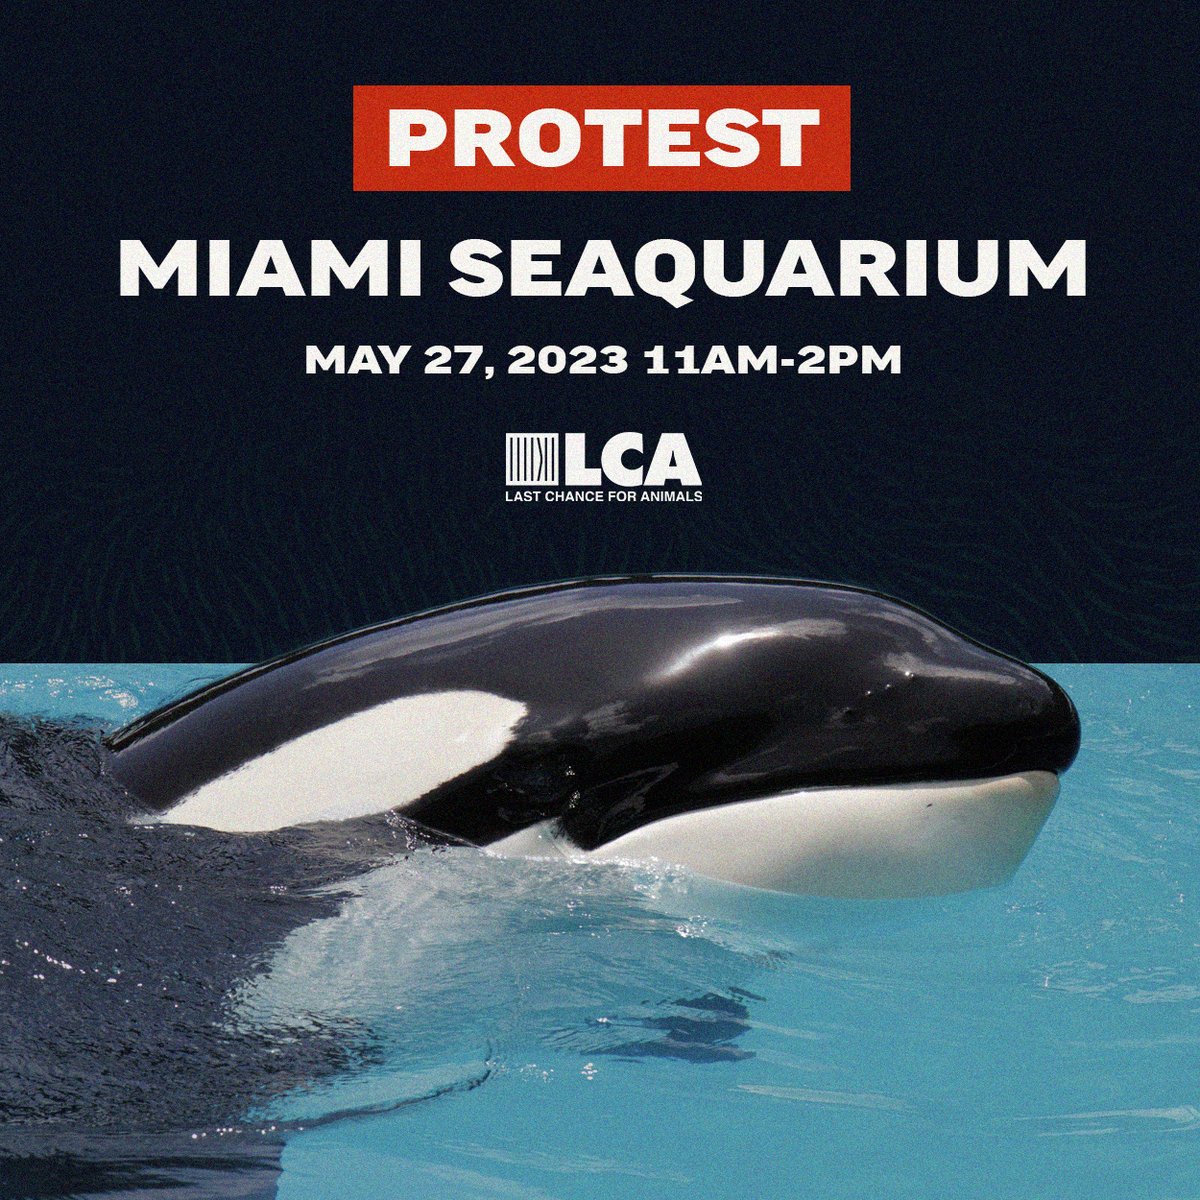 Join the Miami Seaquarium protest with Phil Demers @walrus-whisperer and @urgentseas! 

Sat., May 27th, 2023
11am - 2pm EST
4400 Rickenbacker Causeway, Key Biscayne, Florida

Facebook Event Page:  fb.me/e/2VSE3zH5c

#CaptivityKills #BoycottMiamiSeaquarium